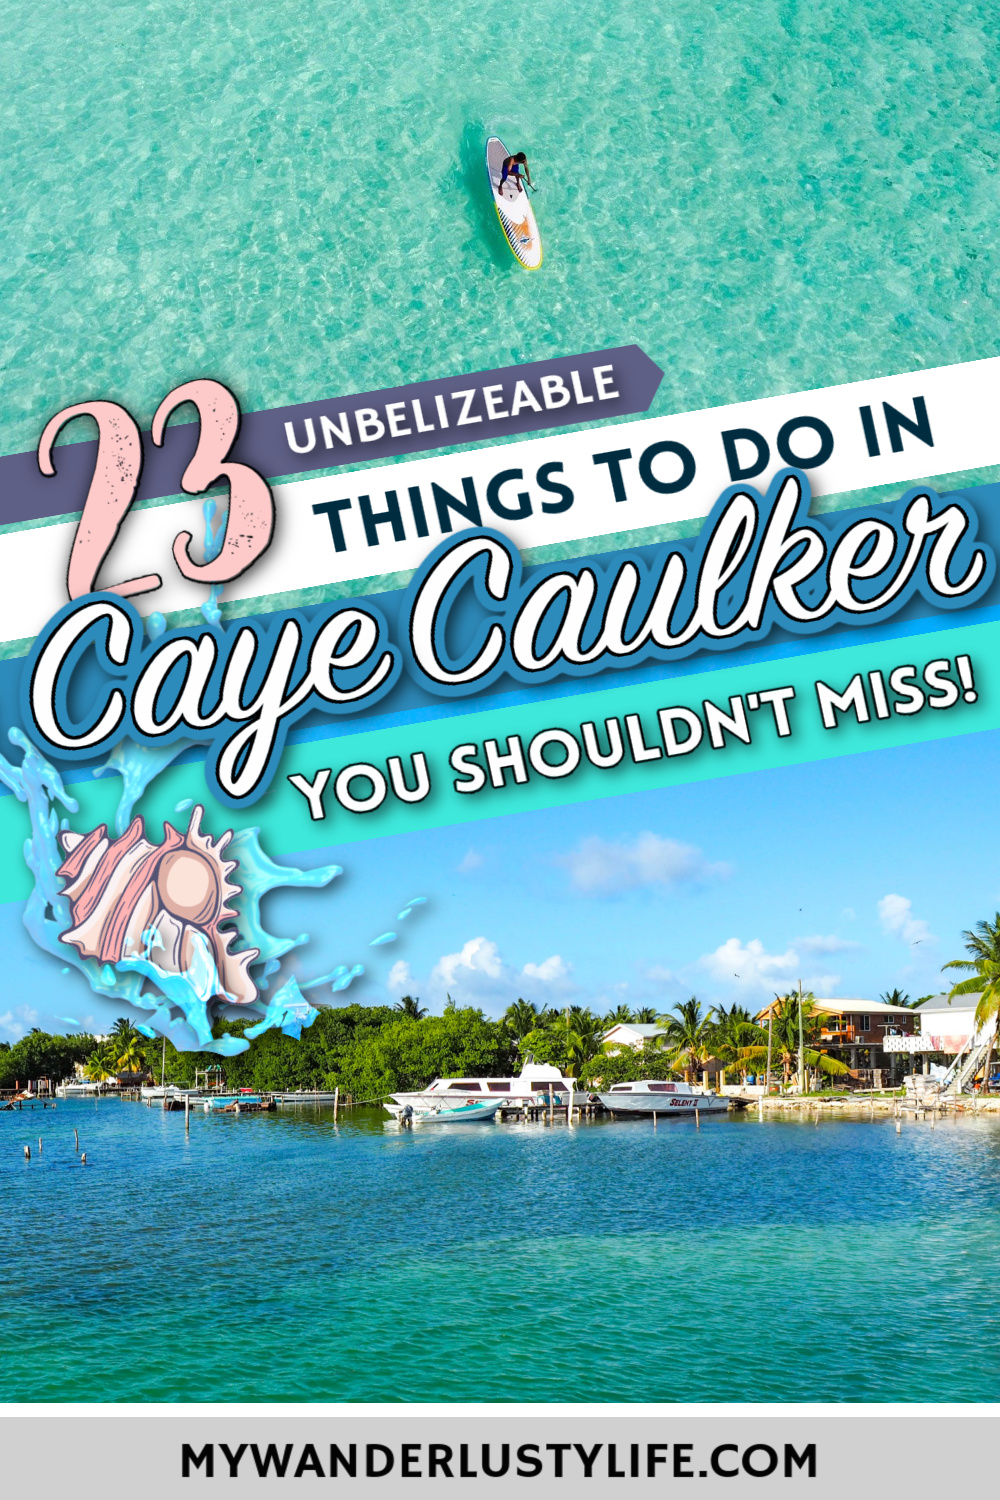 Exciting Things to Do in Caye Caulker, Belize, What to do in Caye Caulker, Caye Caulker travel, Caye Caulker hotels, snorkeling, water activities, Caye Caulker restaurants, and more!